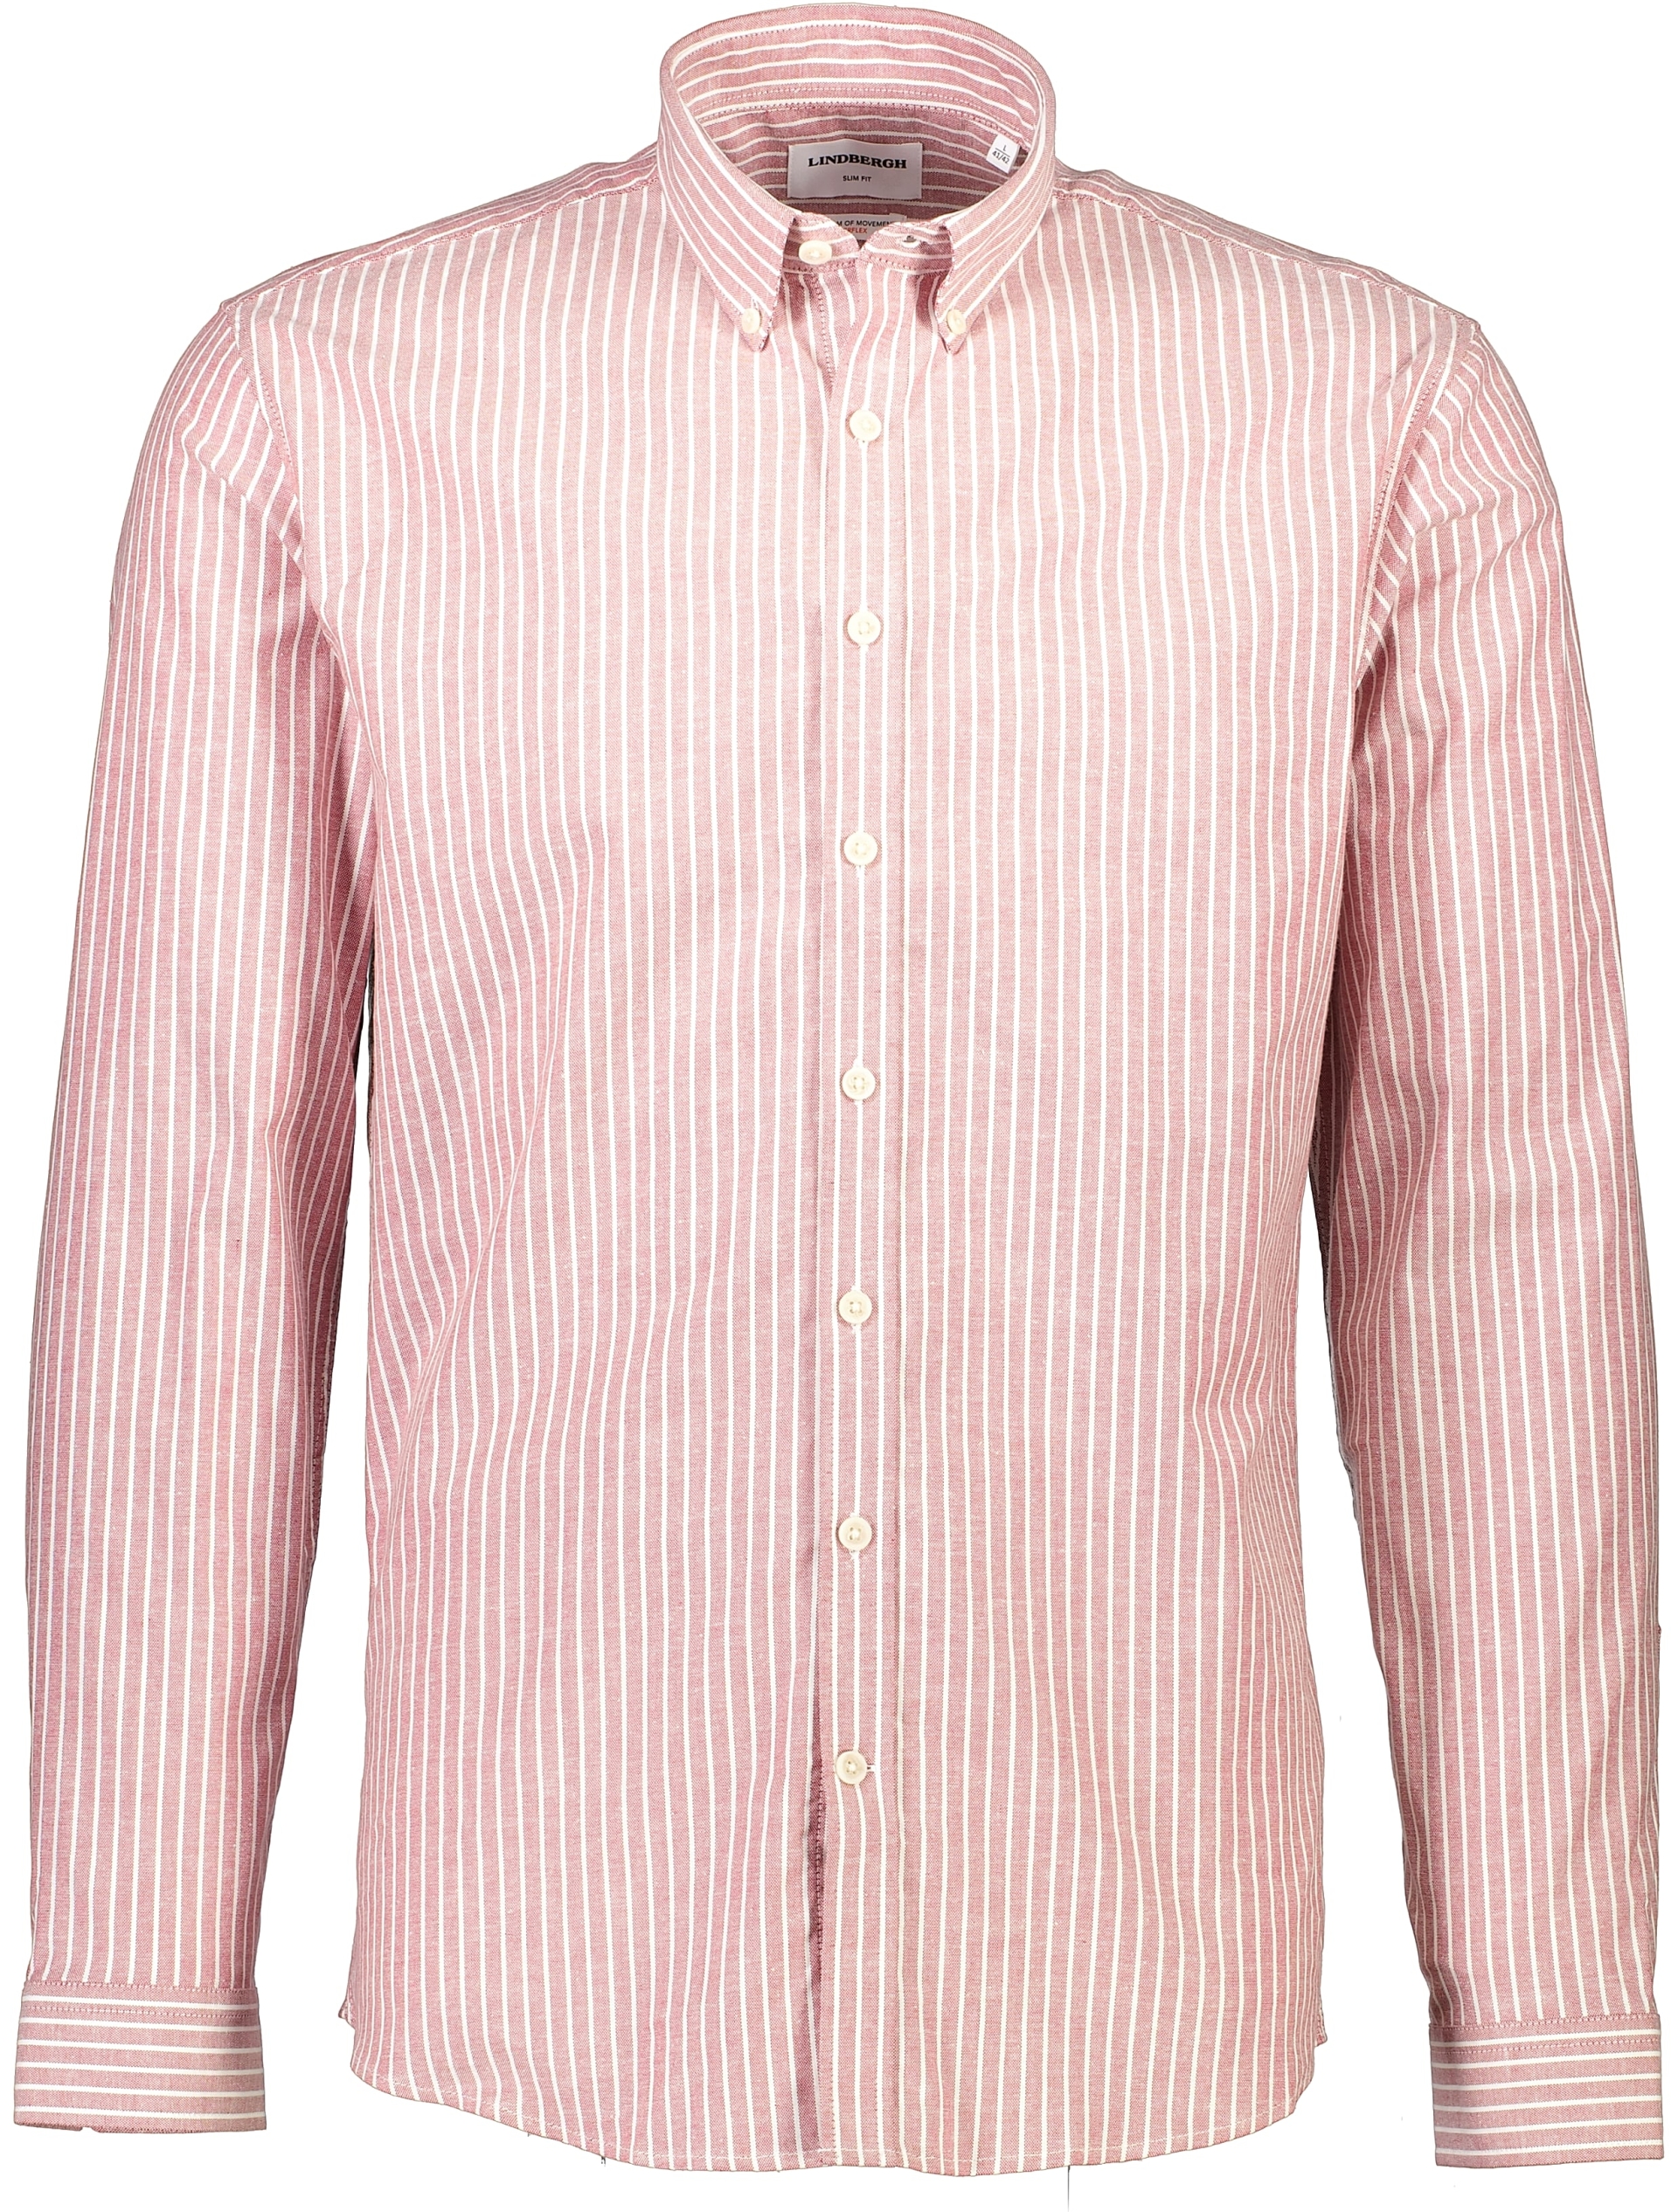 Lindbergh Oxford shirt red / dusty rose